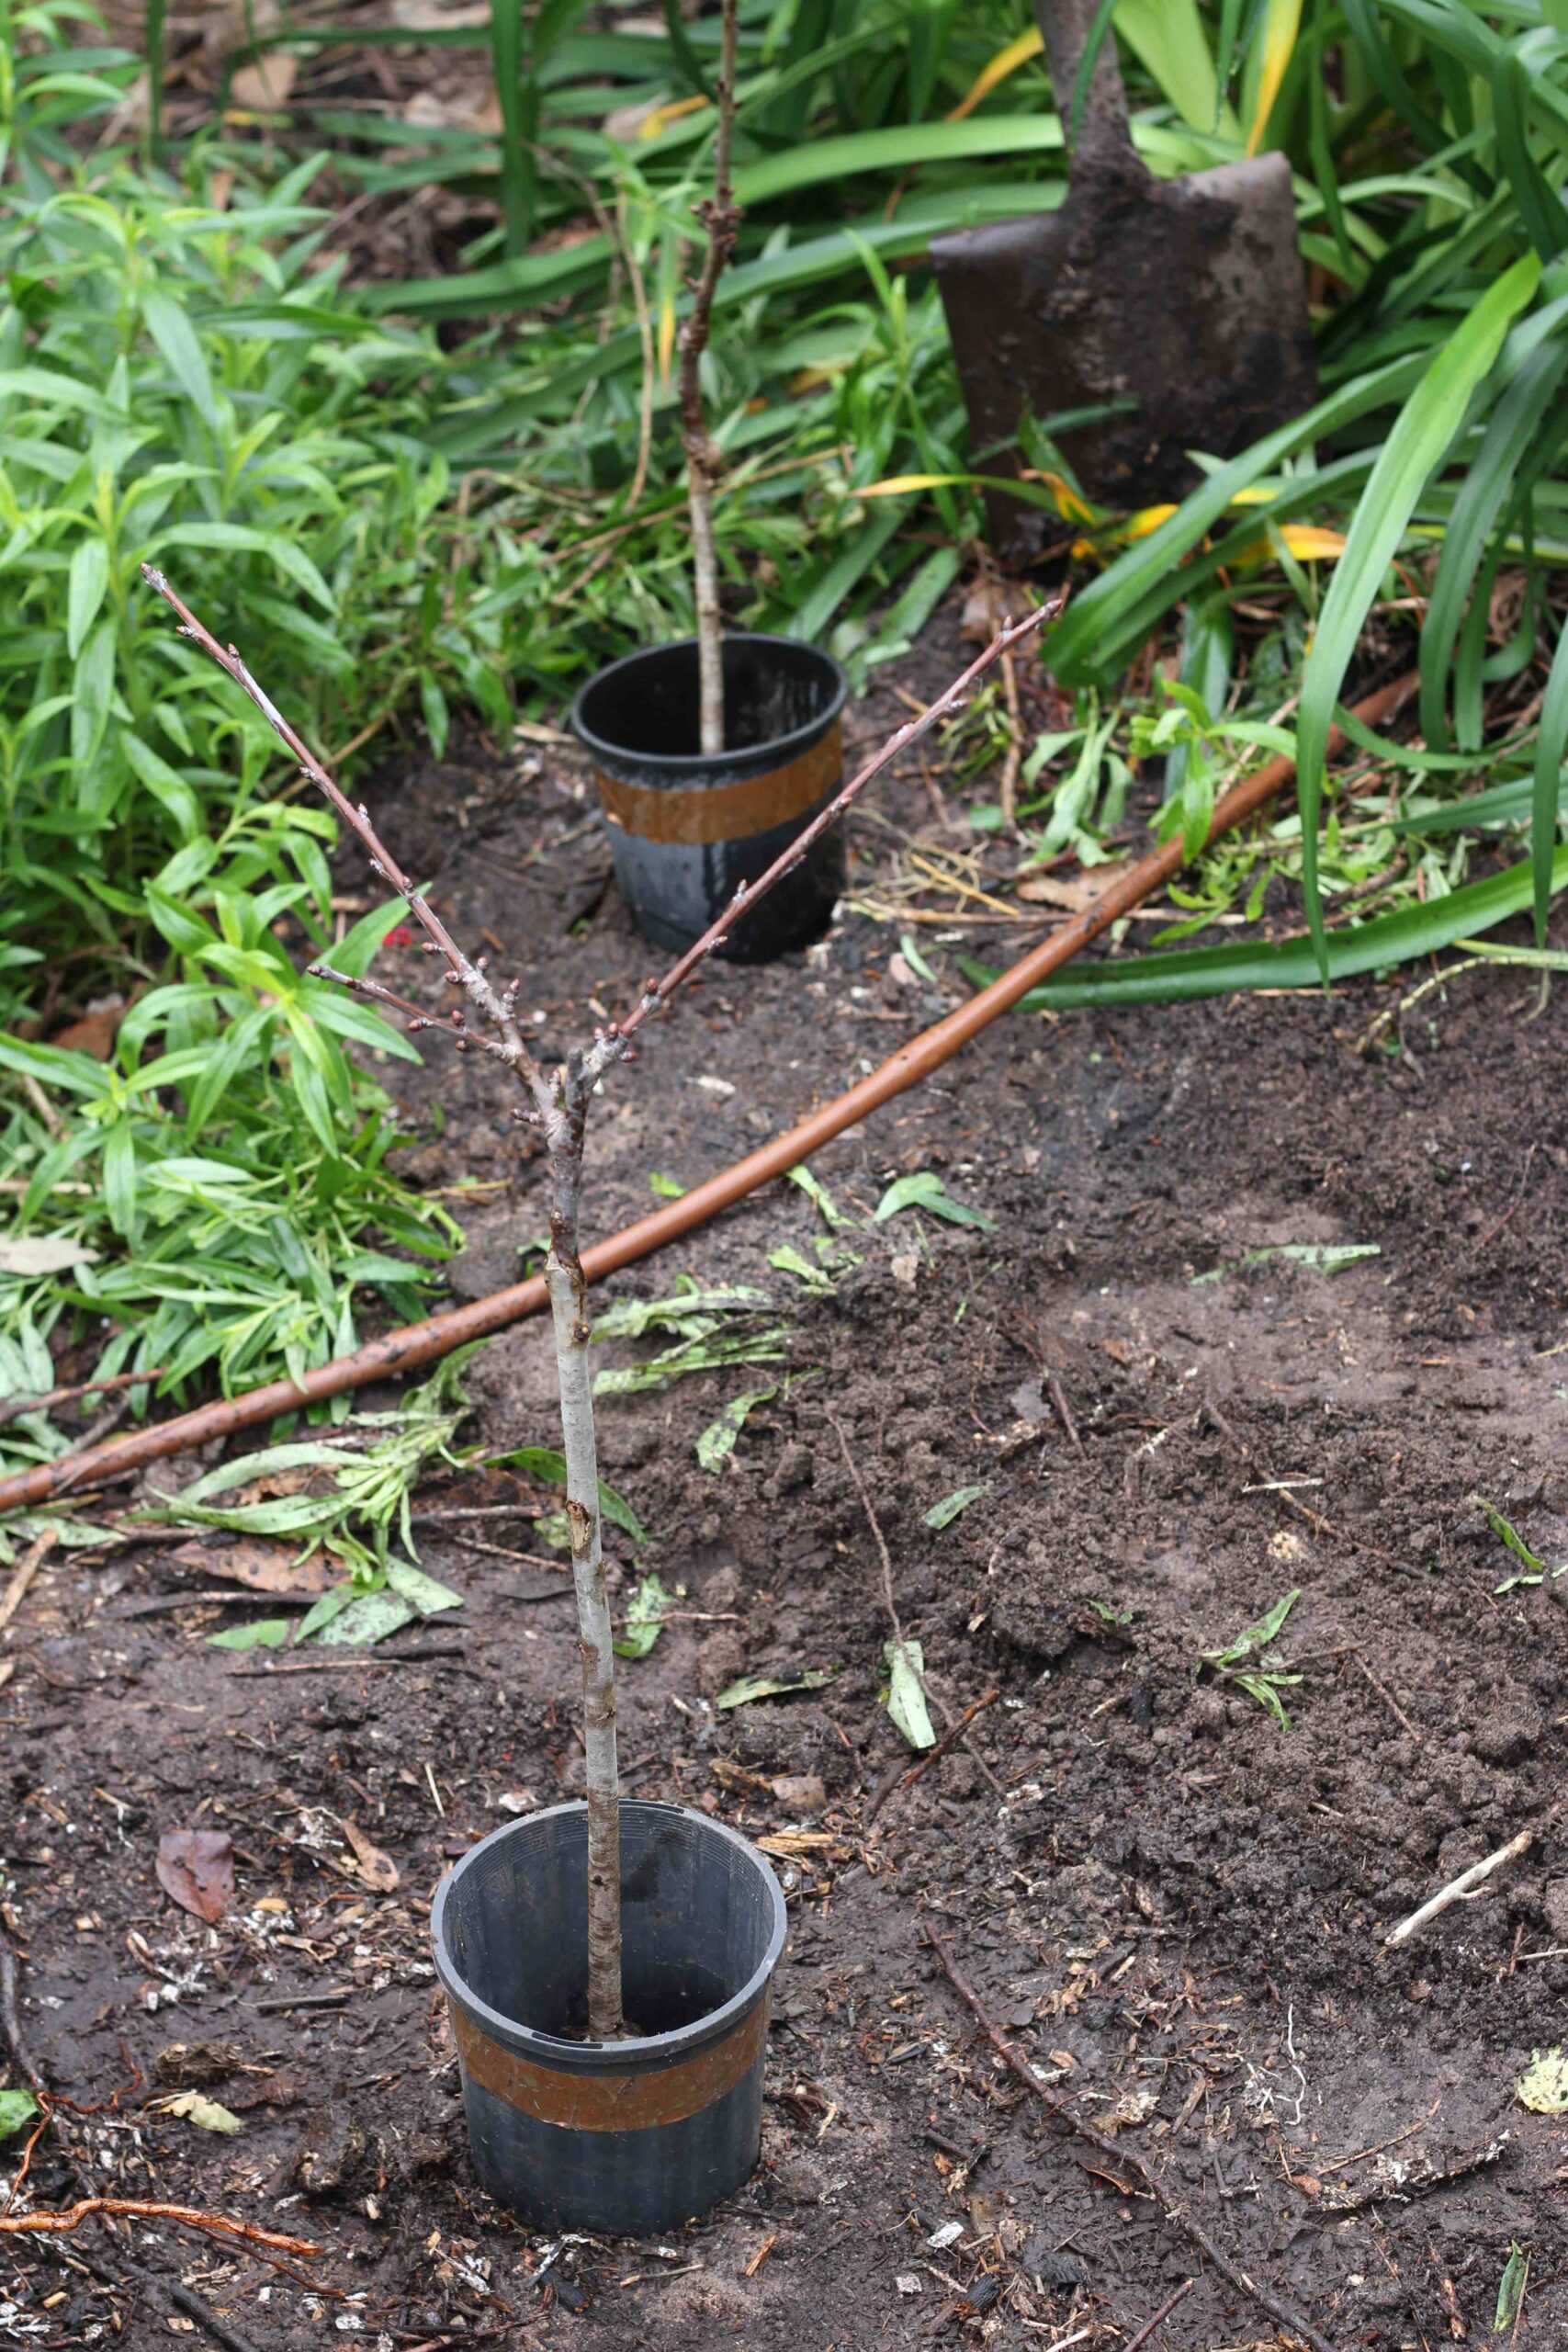 Planting bare-rooted trees